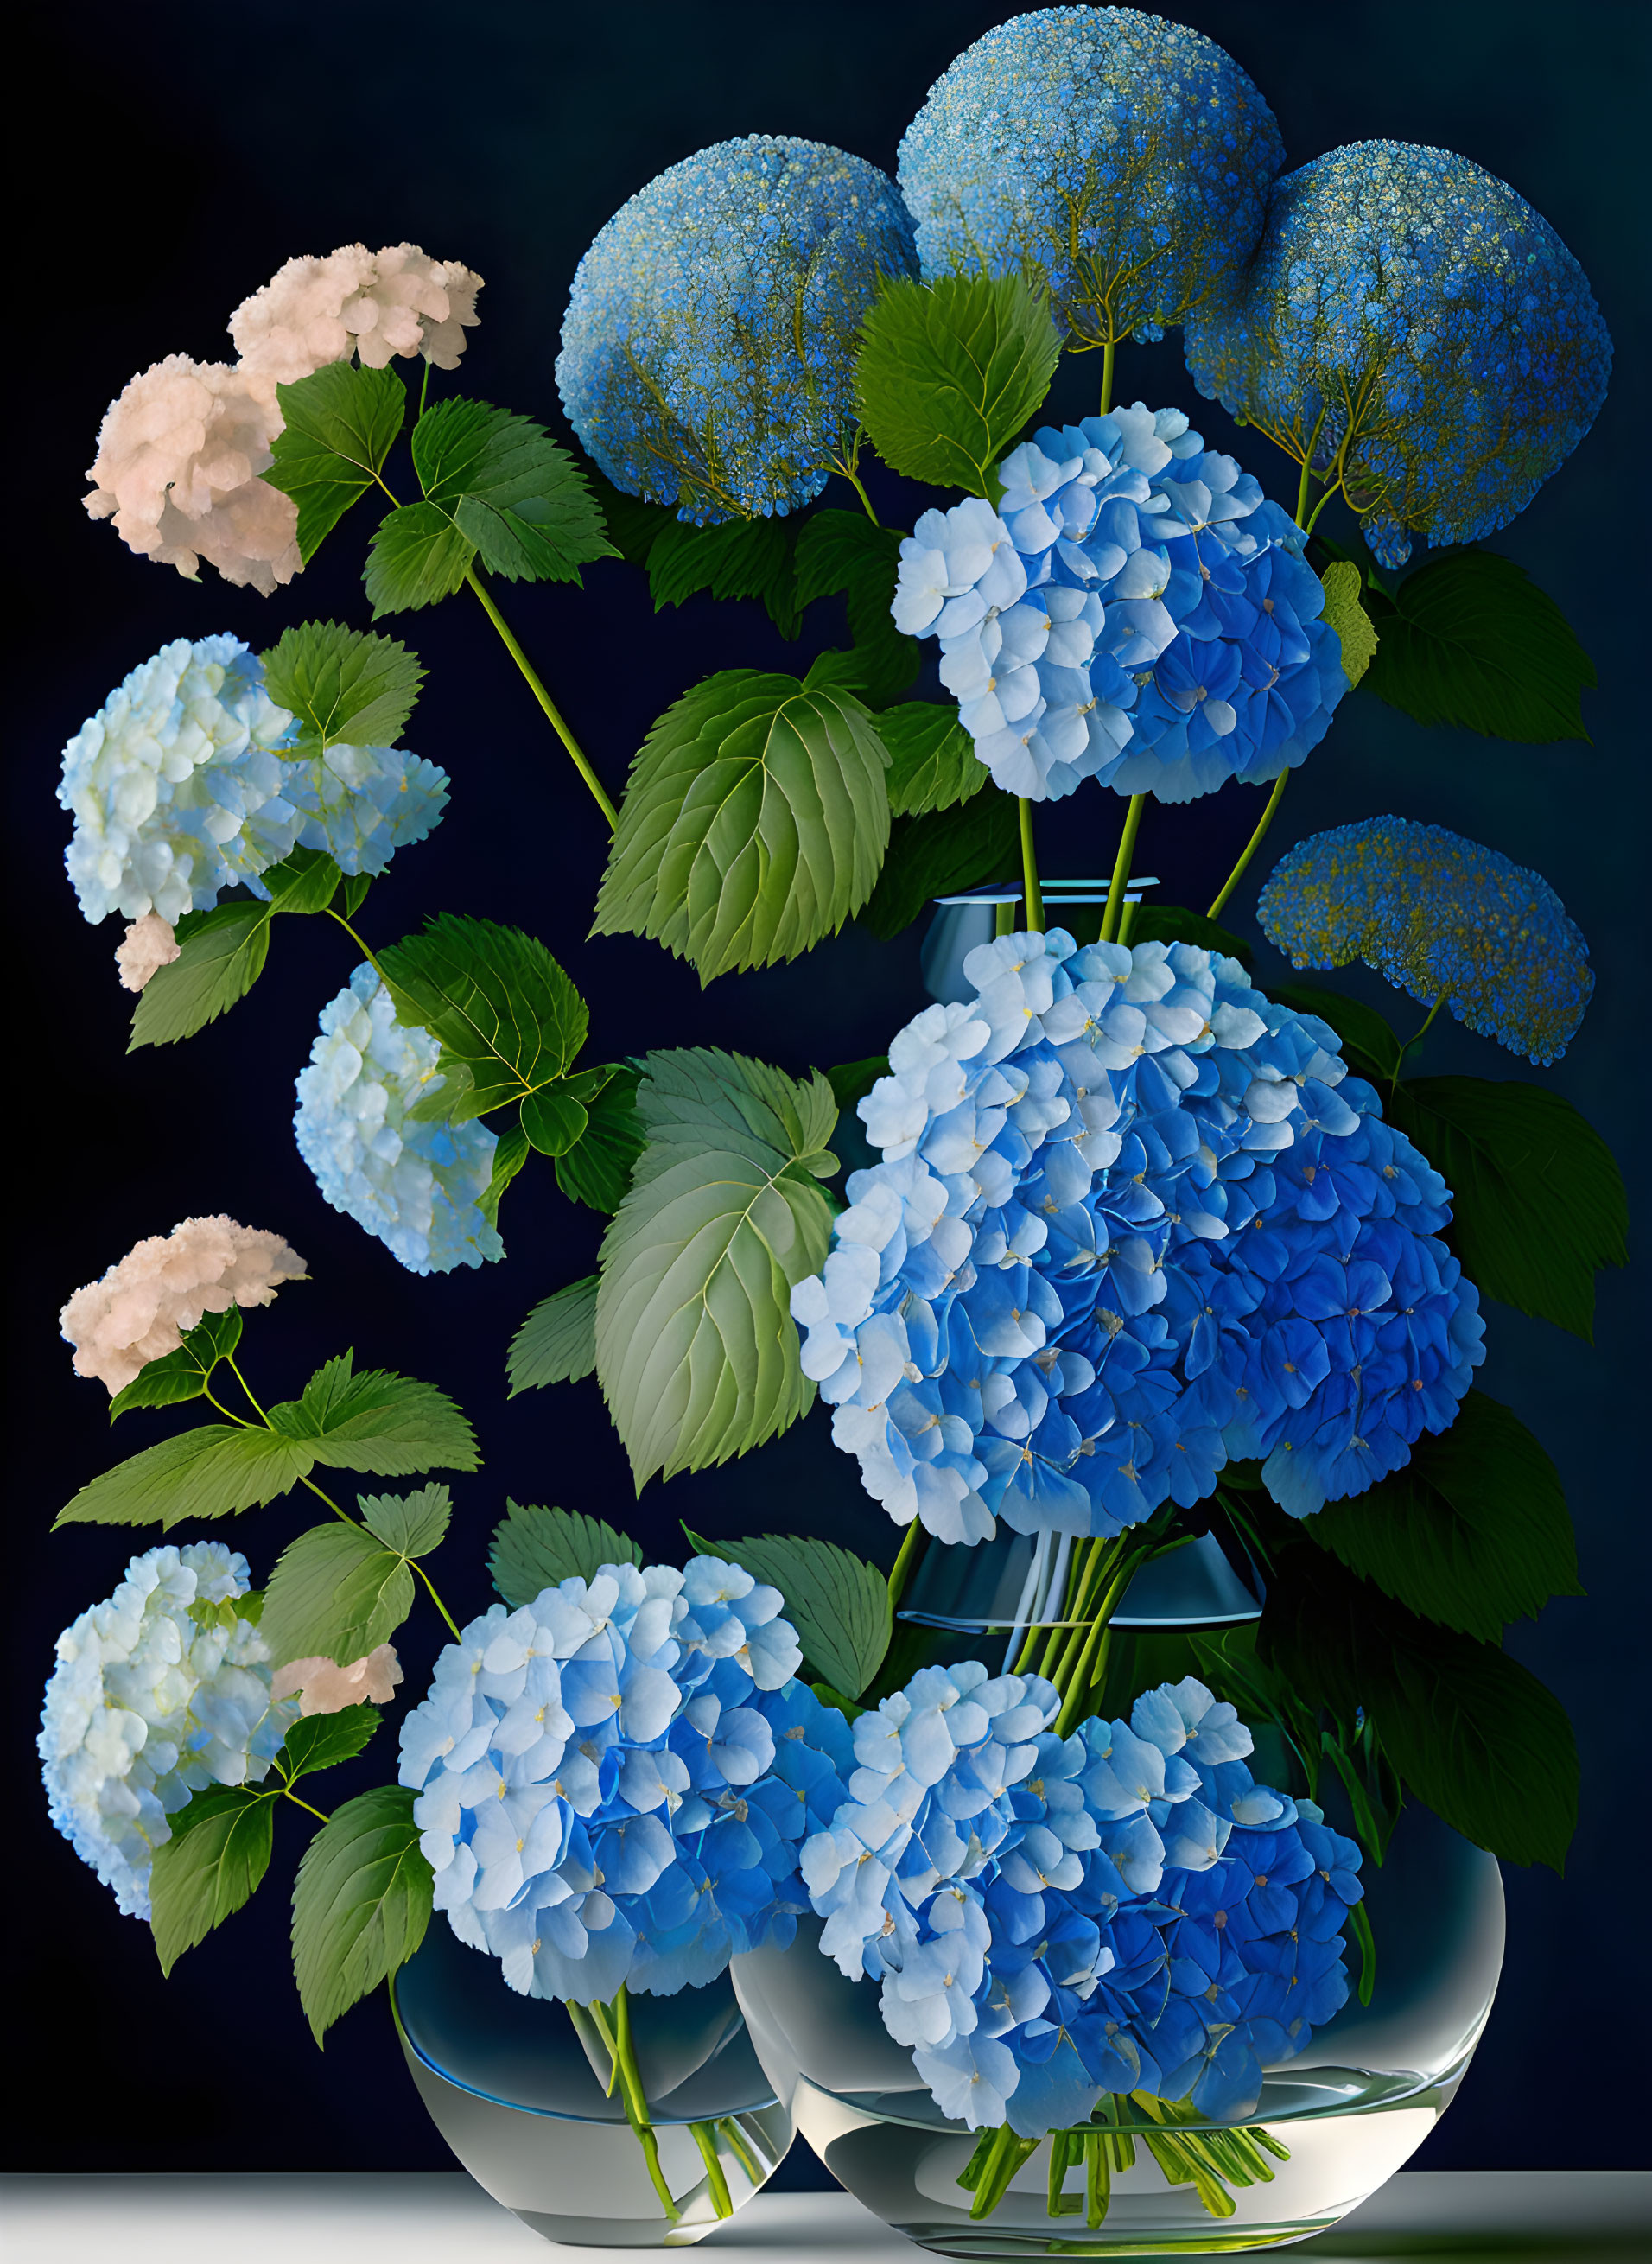 Digital painting of lush blue and pale pink hydrangeas in translucent vase